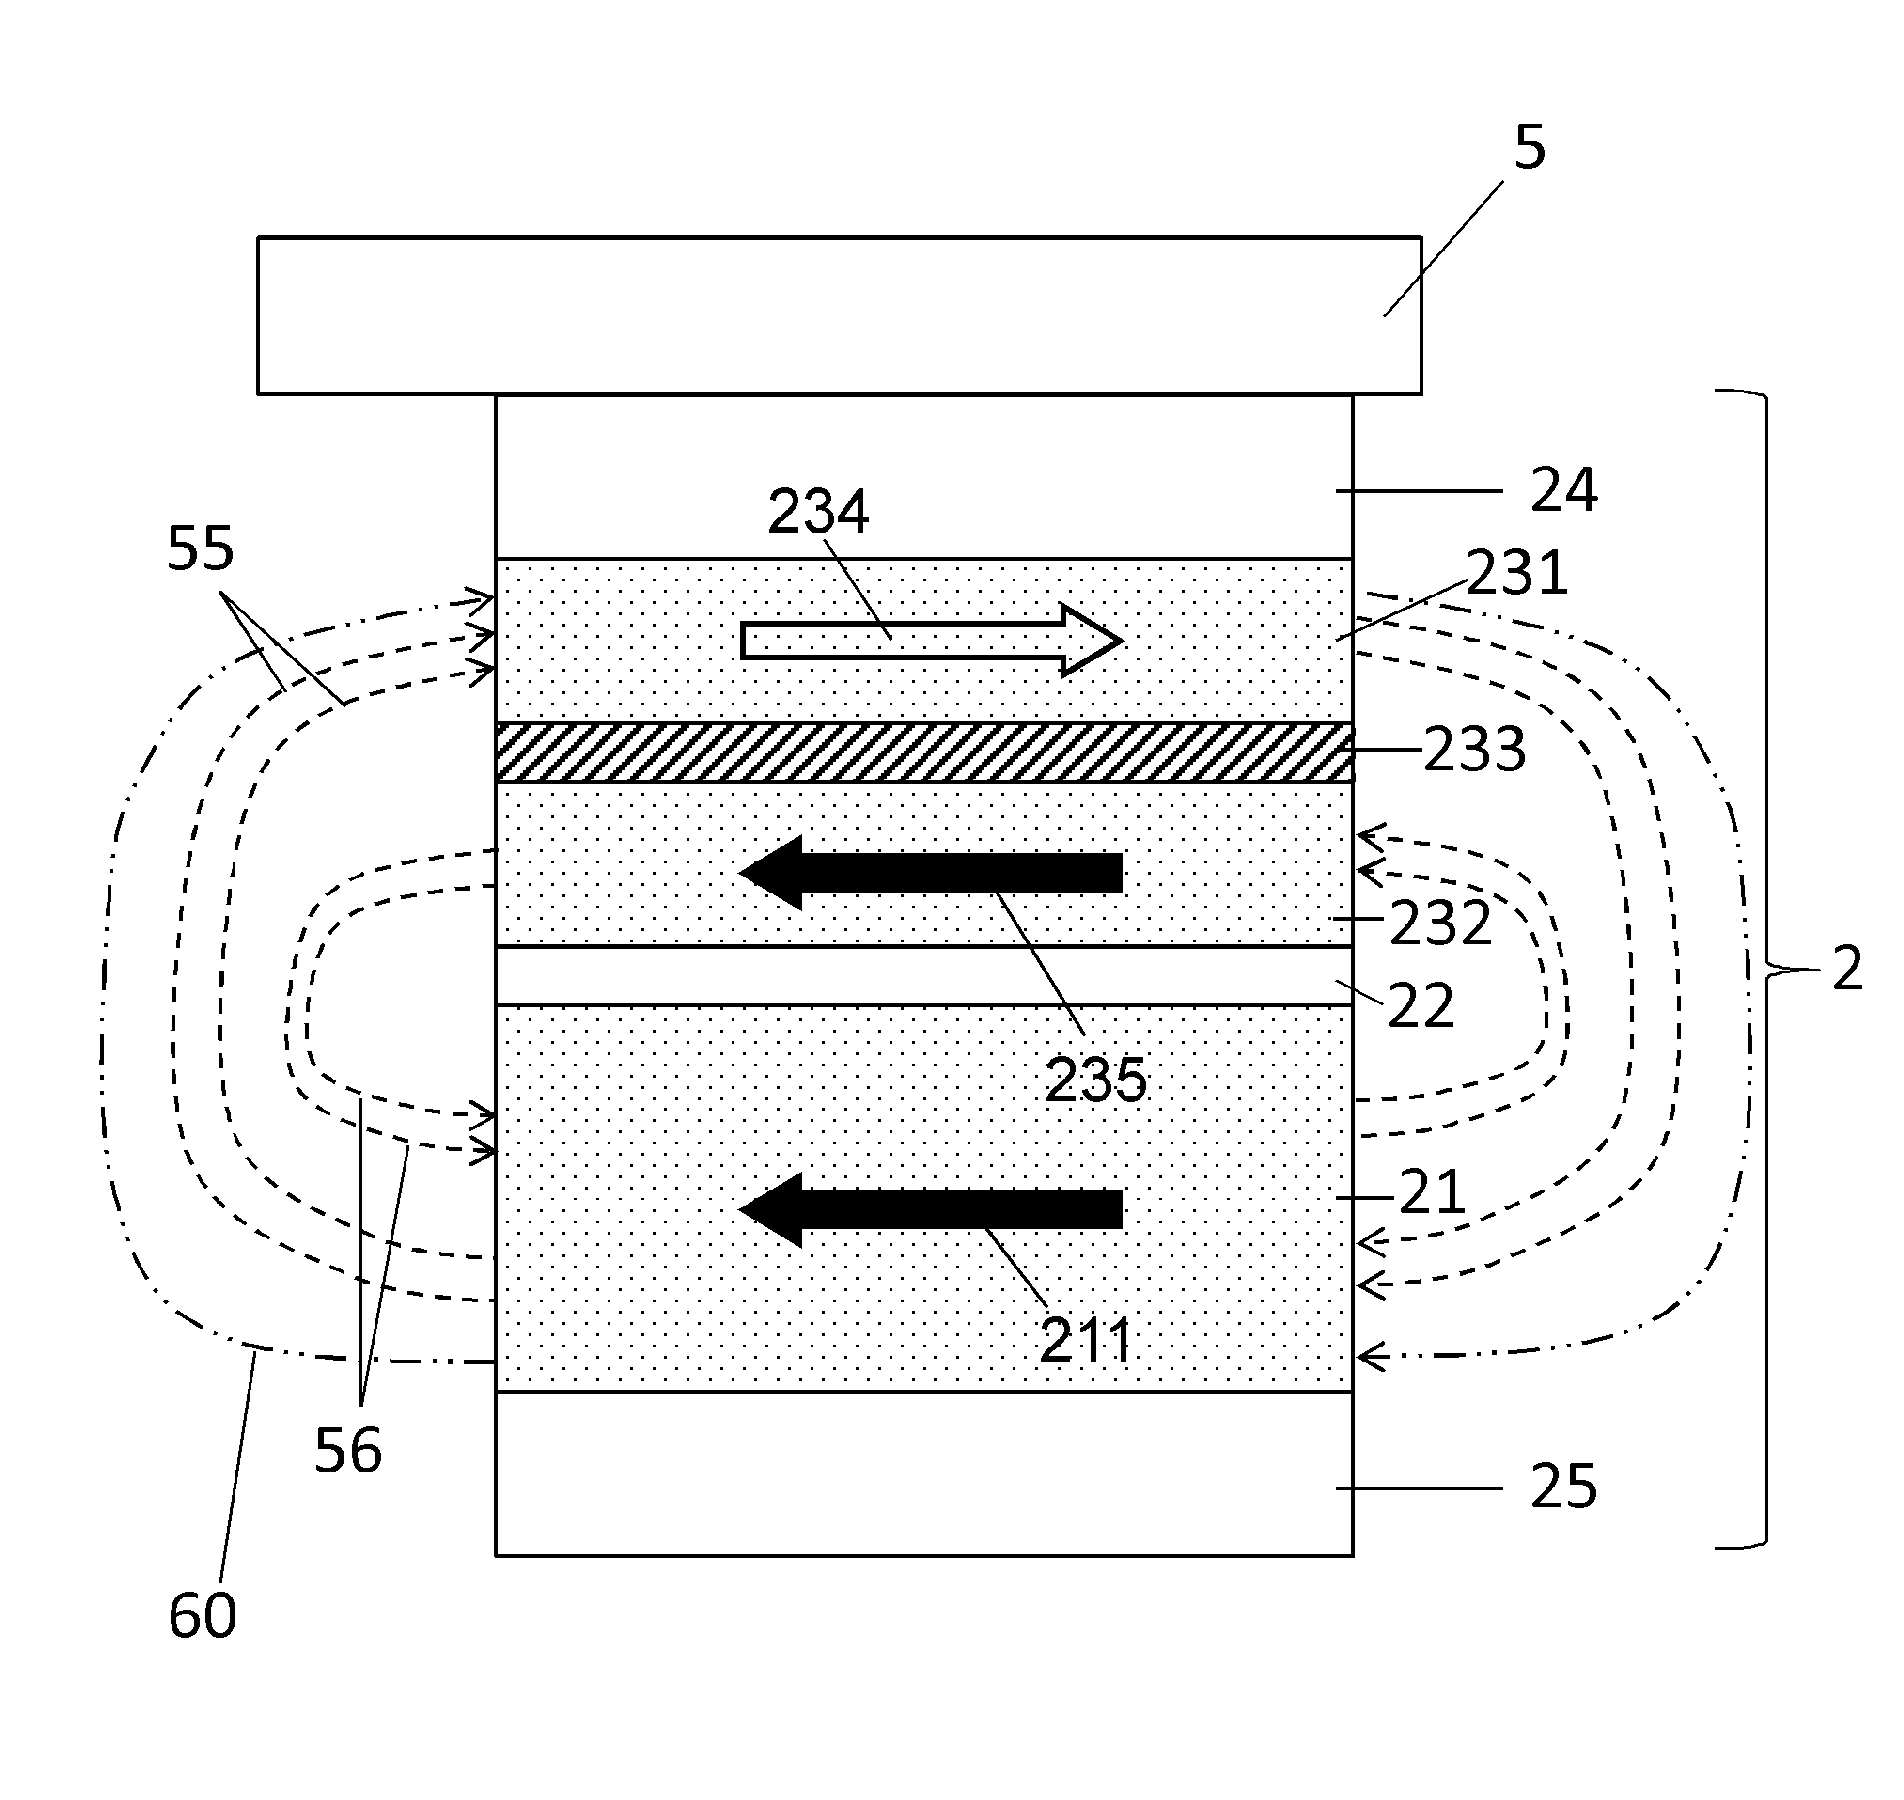 Magnetic random access memory (mram) cell and method for reading the mram cell using a self-referenced read operation